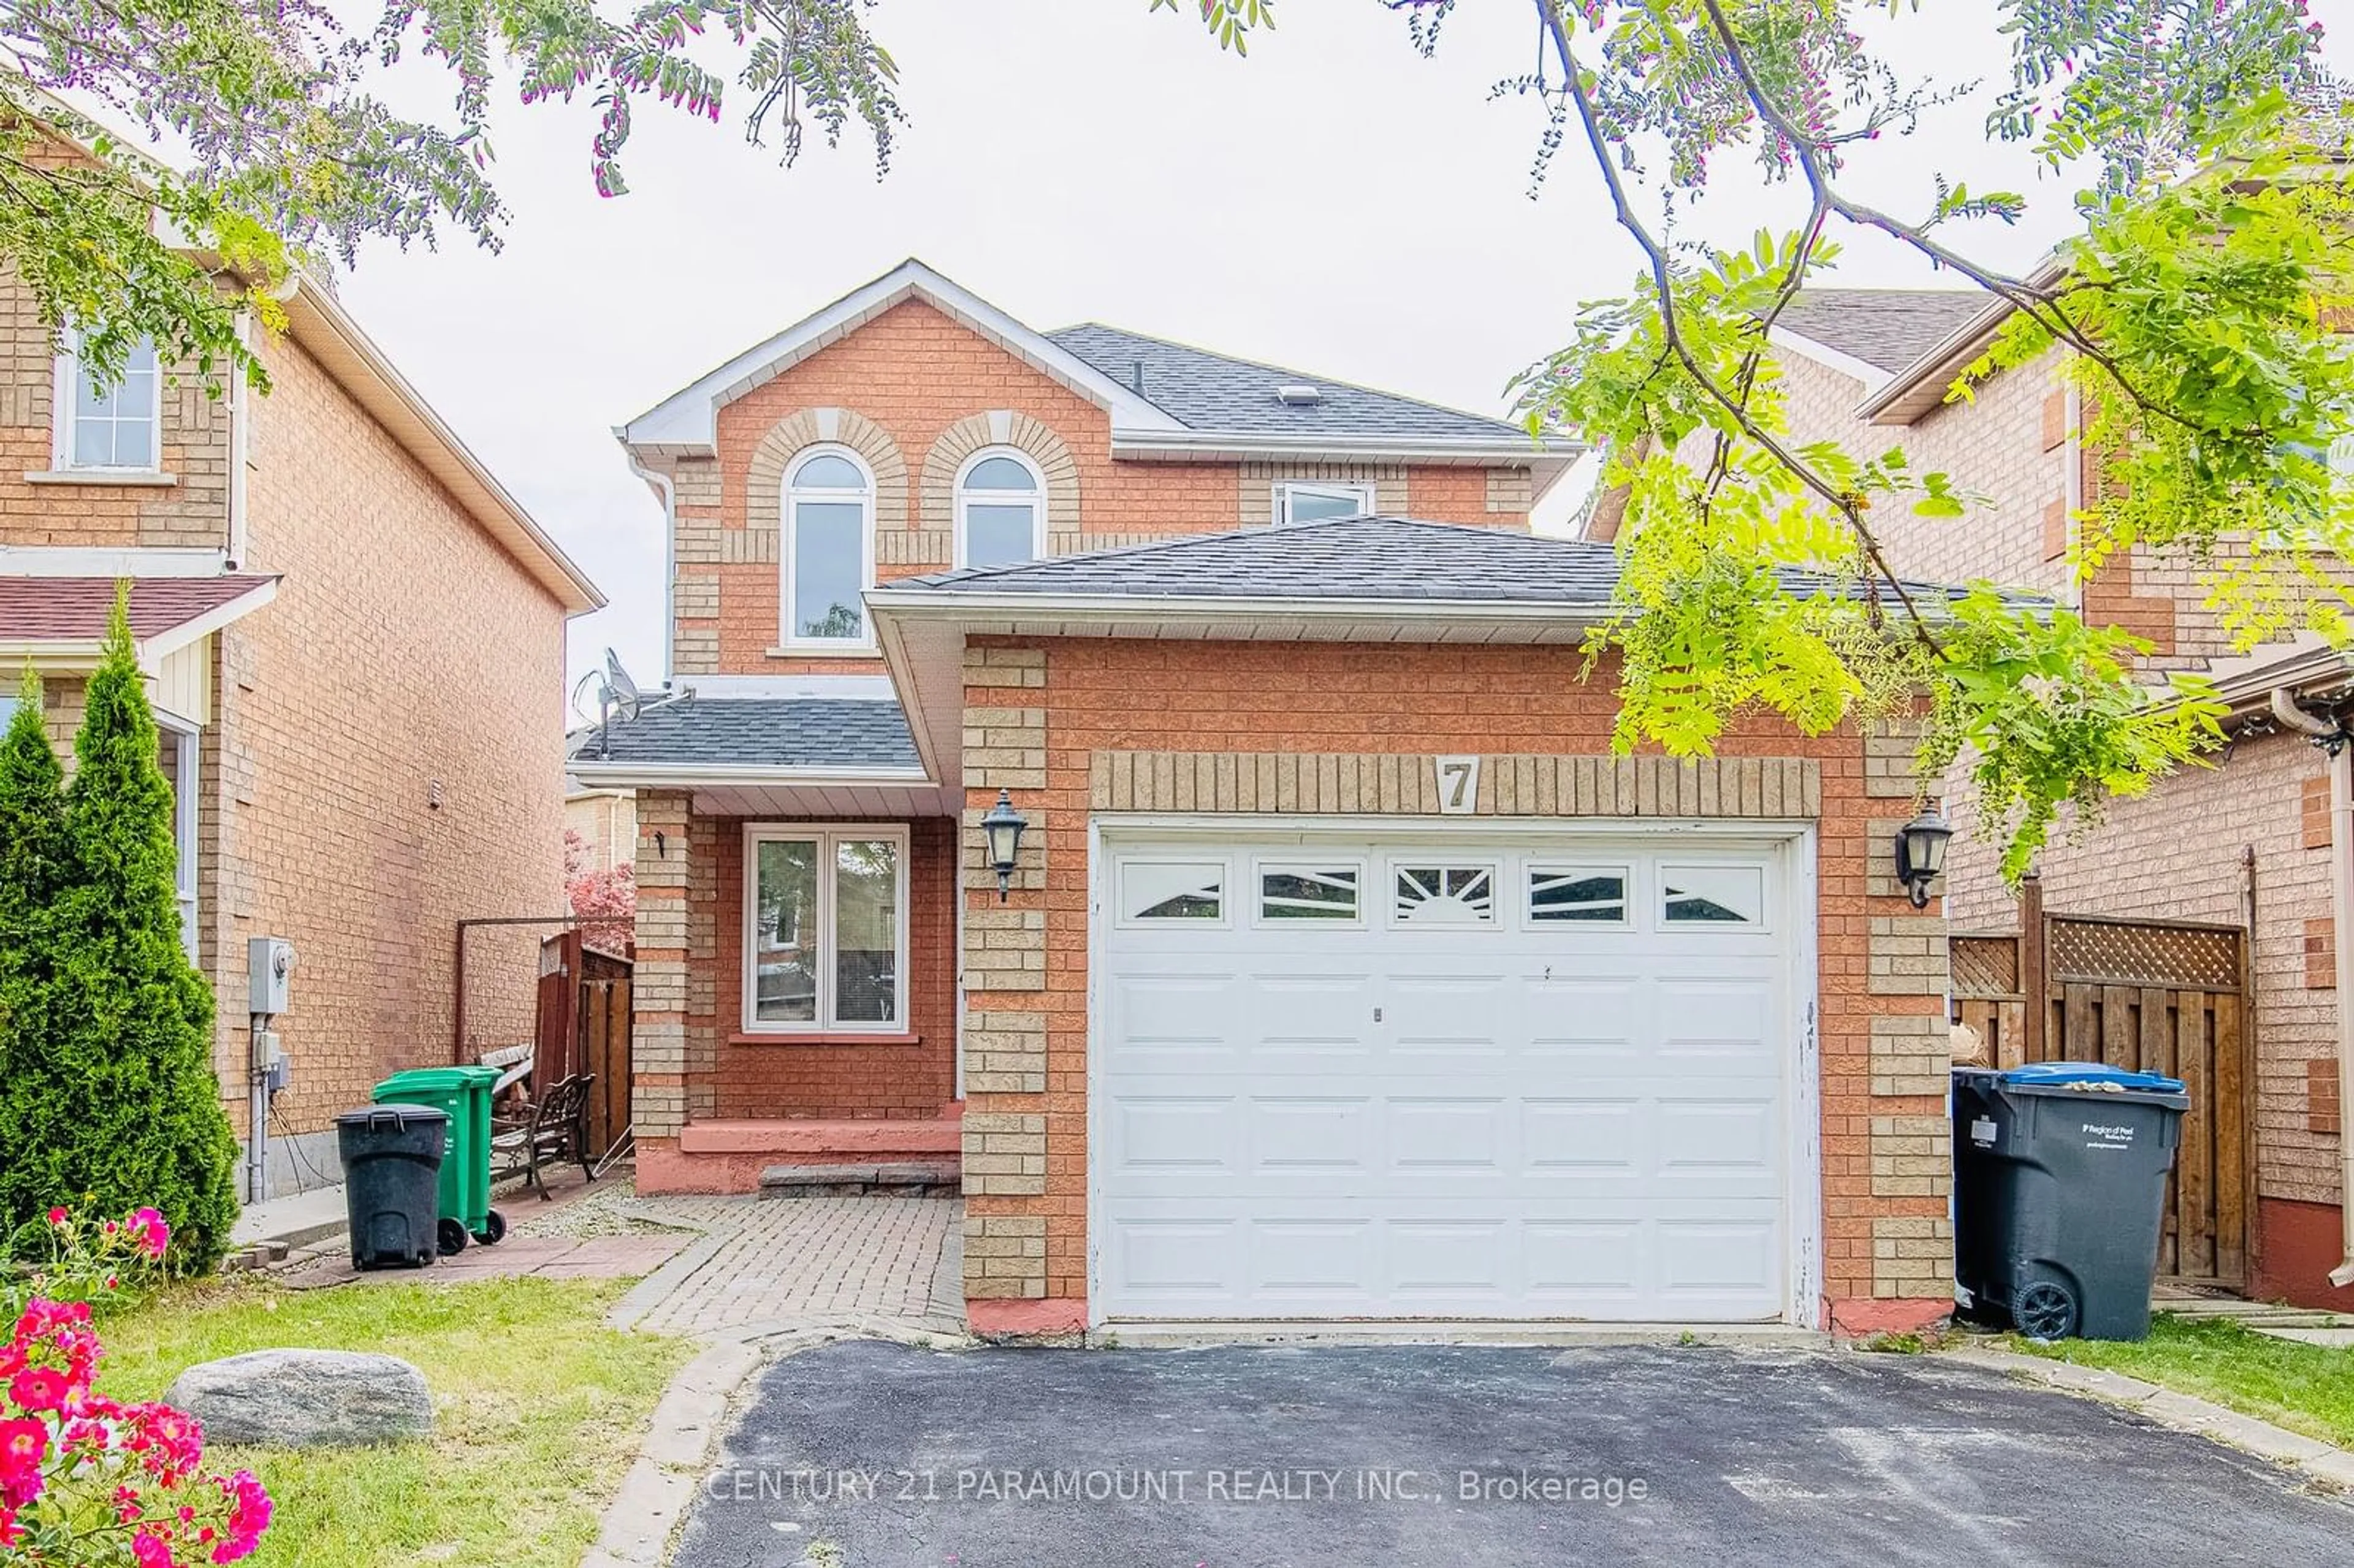 Home with brick exterior material for 7 Sunley Cres, Brampton Ontario L6Y 5B7